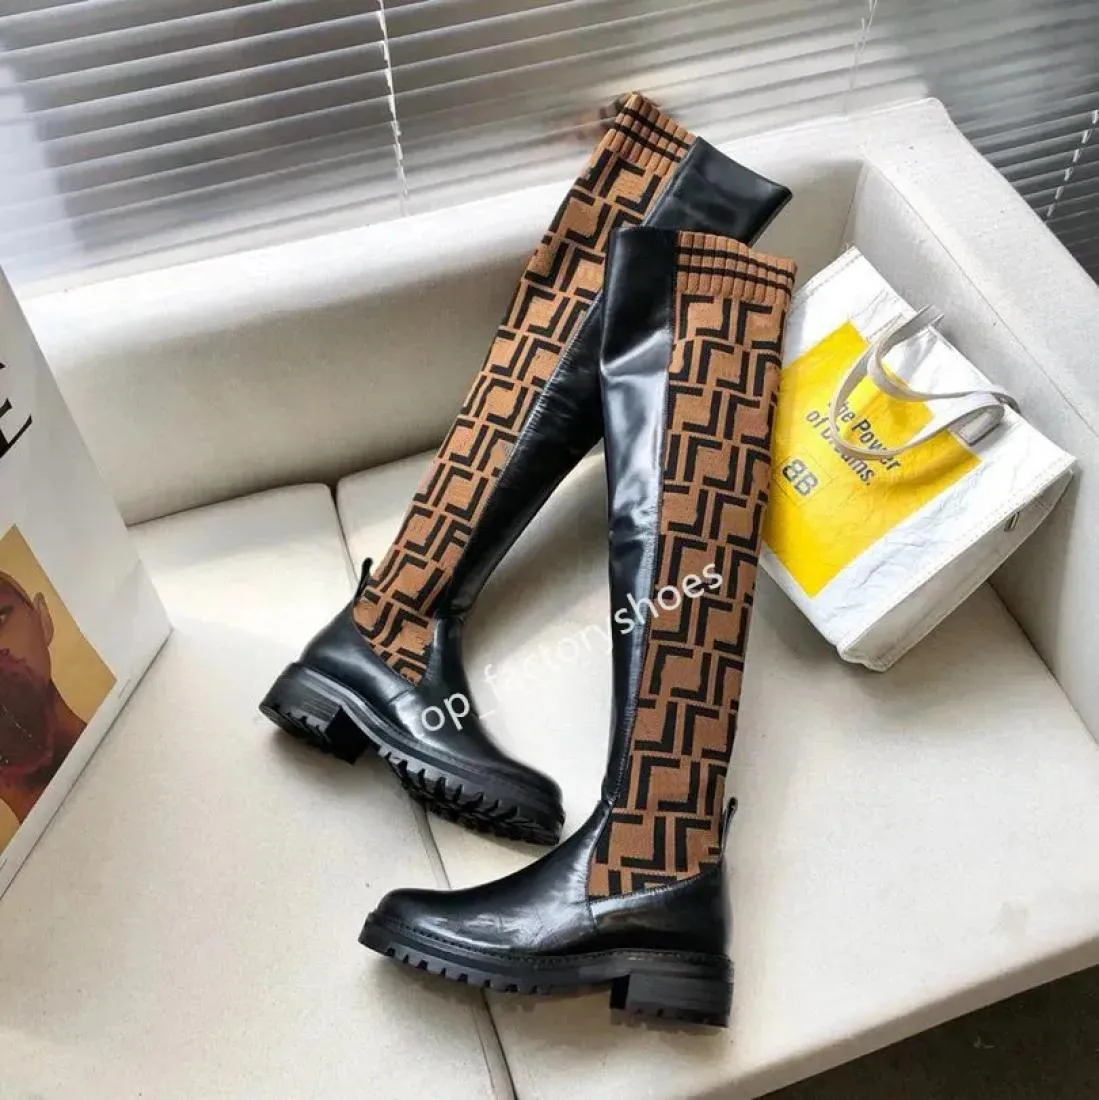 Designer Boots Letter Women Boot Over The Knee Boot Knit Socks Booties Luxury Fashion Sexy Ankle Shoes9988549